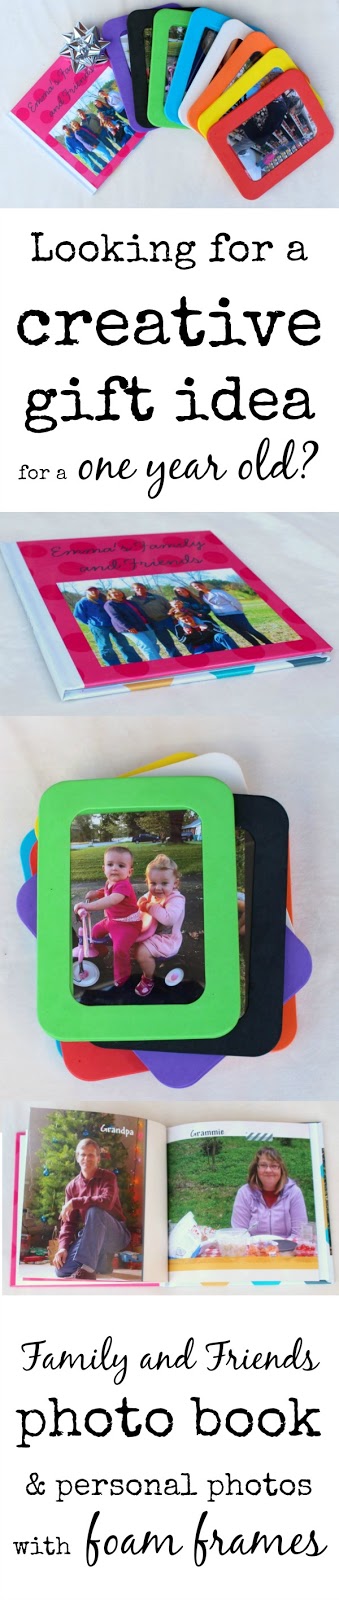 A creative and personalized gift idea for a one year old or a toddler- A family and friends photo book and/or family photos framed in colored foam. My toddler LOVES this!